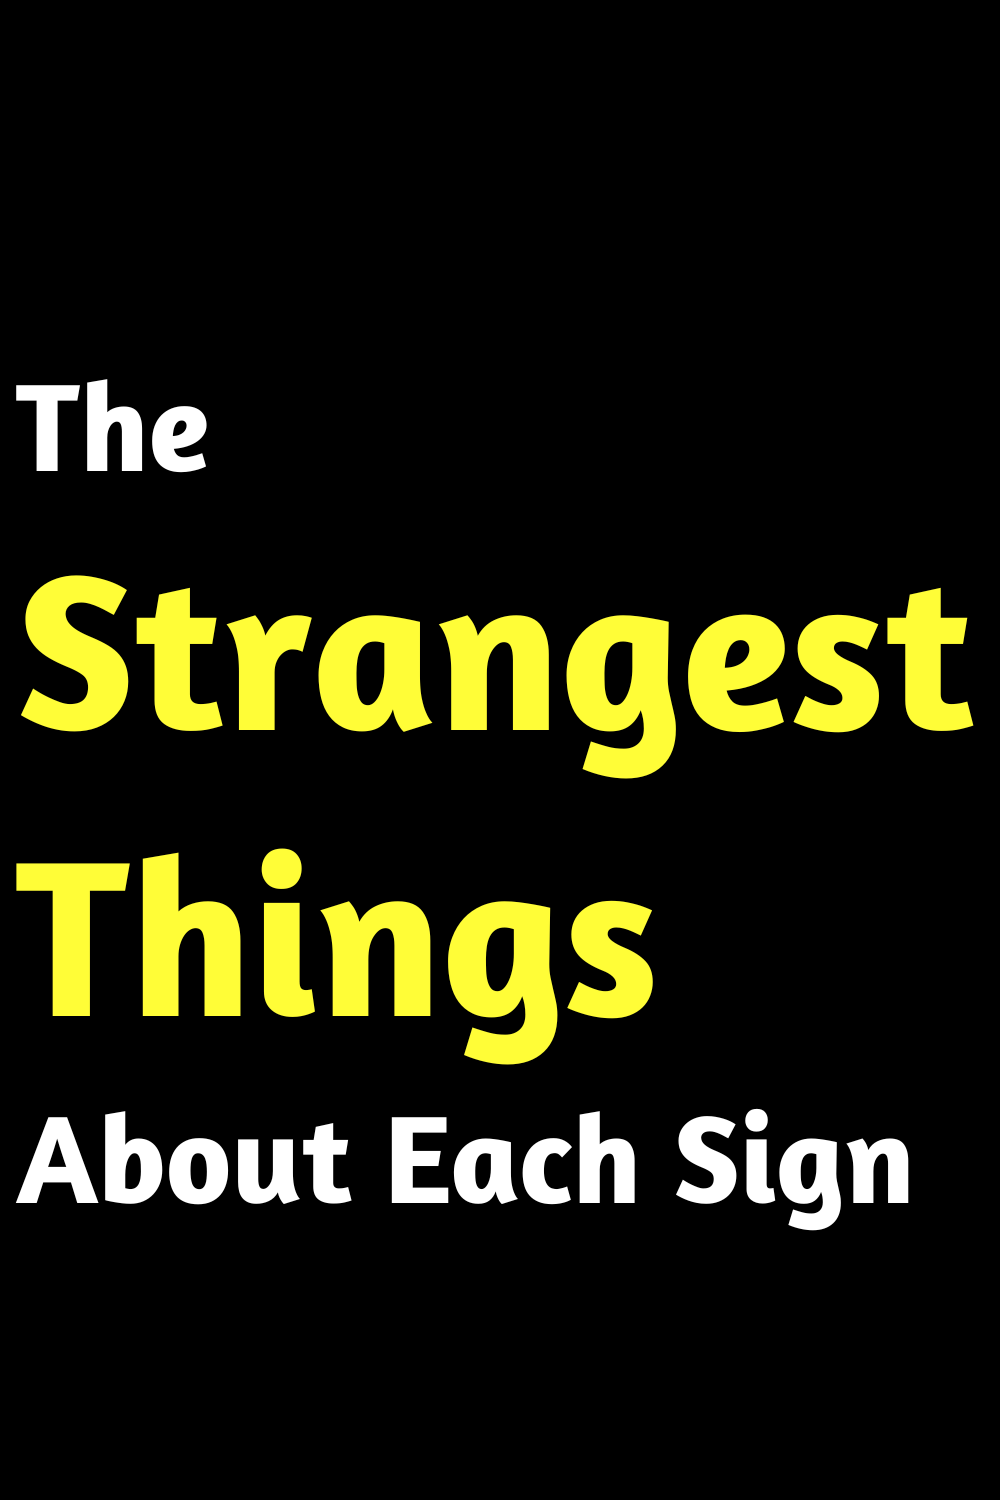 The Strangest Things About Each Sign